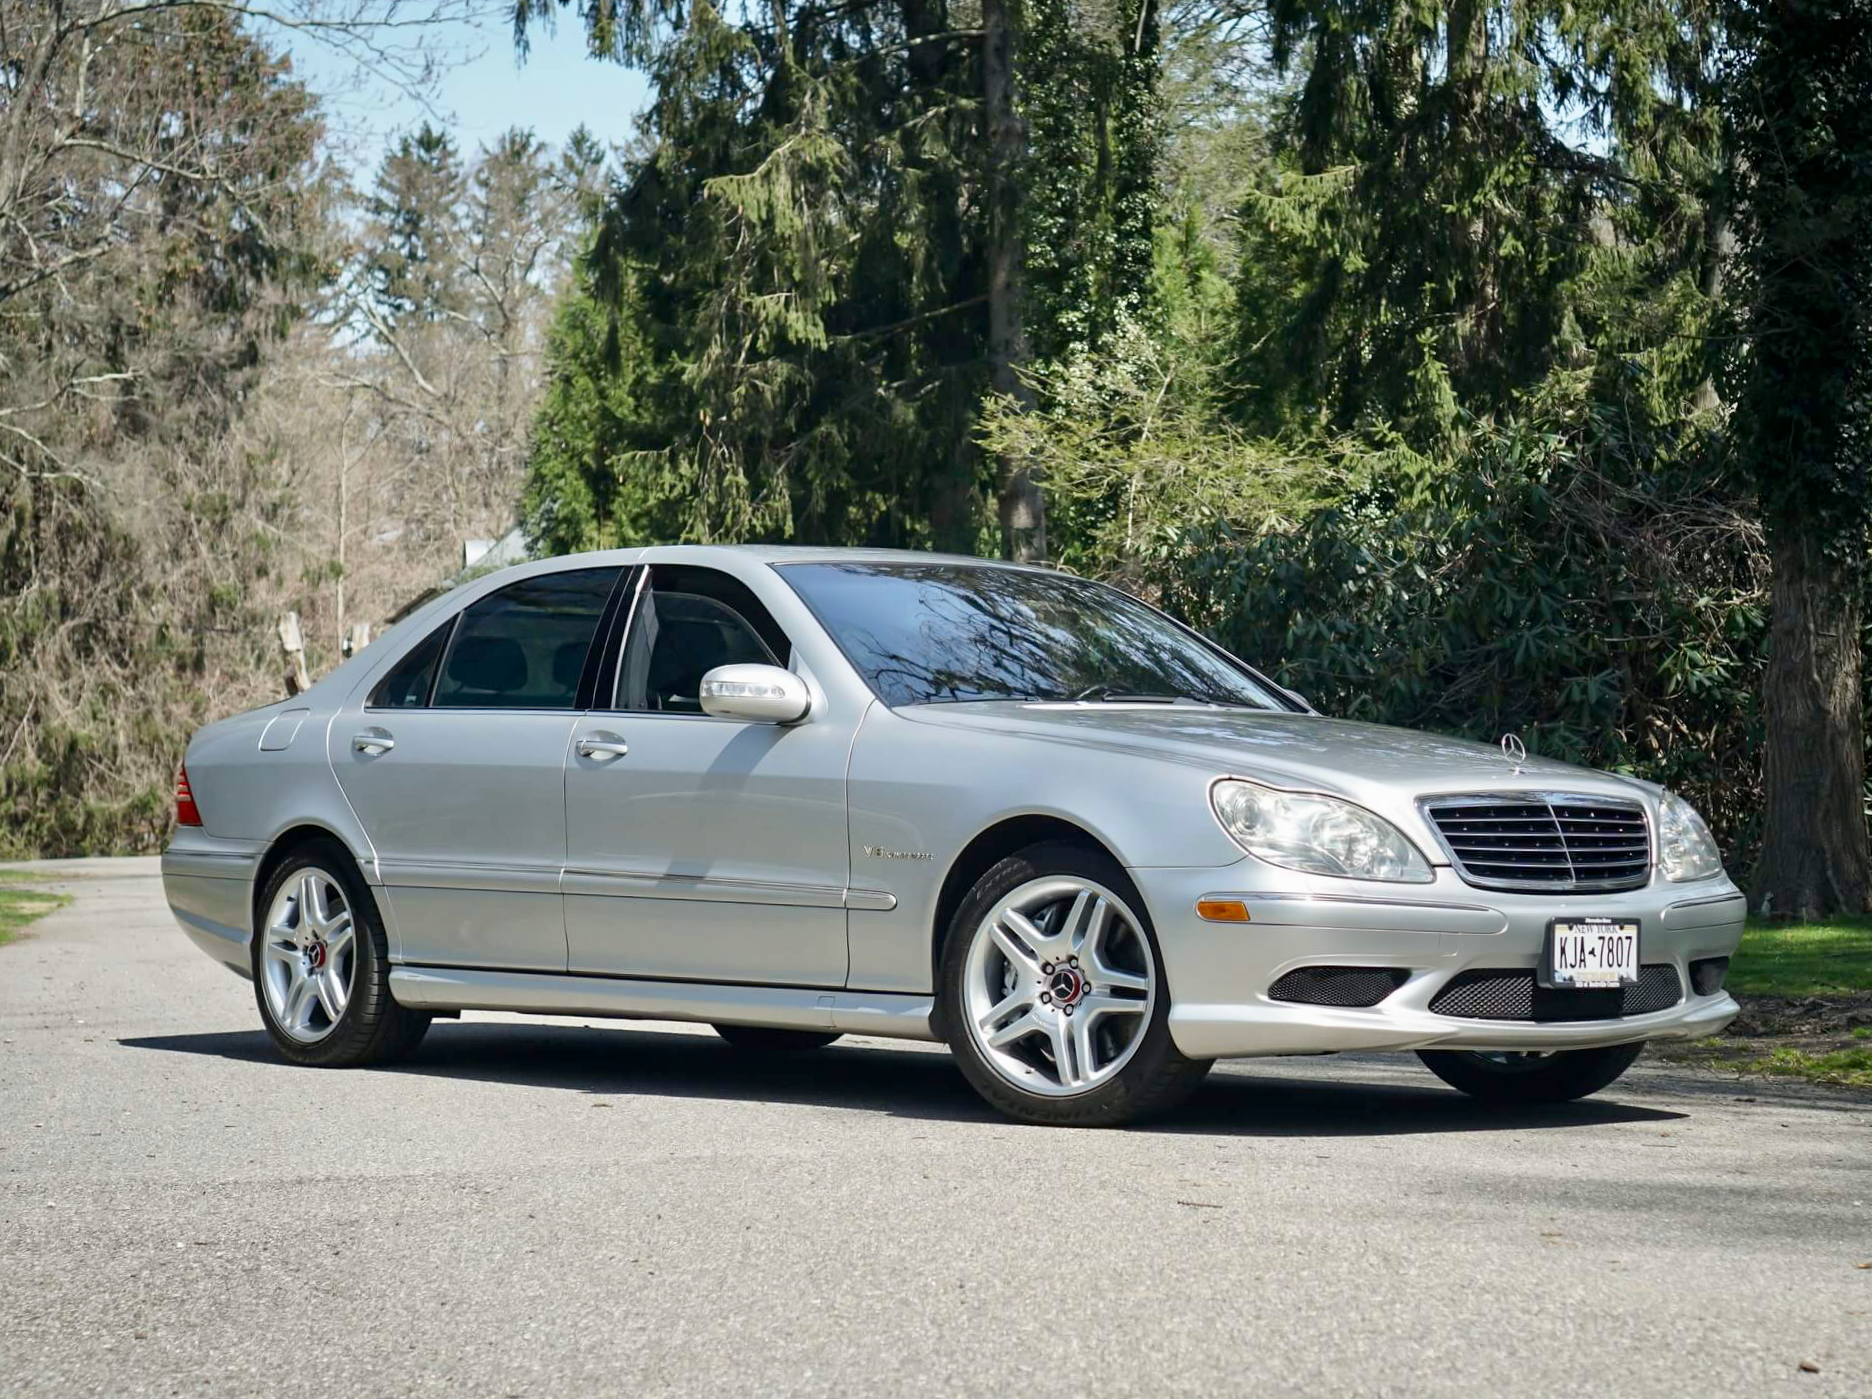 2004 Mercedes-Benz S55 AMG w/86k Miles For Sale | The MB Market